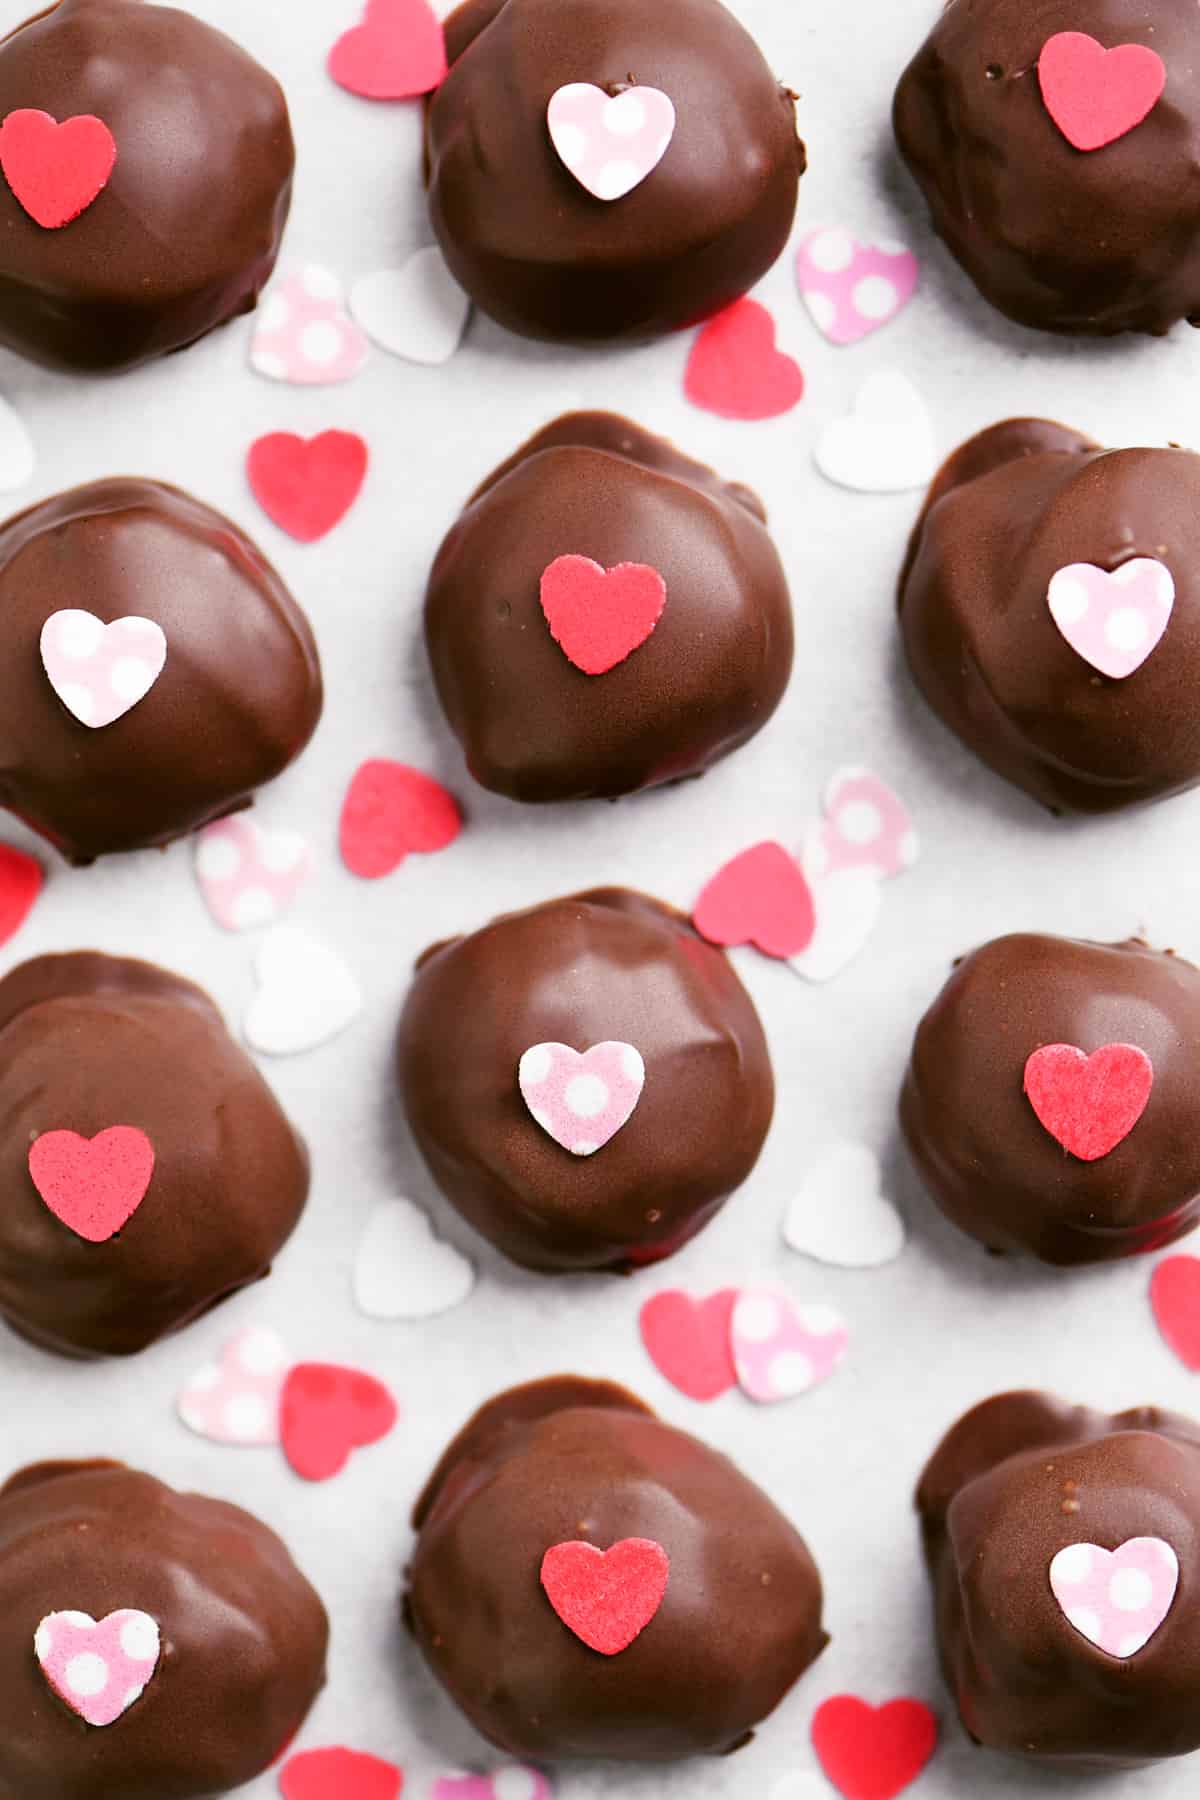 a dozen chocolate truffles with heart shaped candies